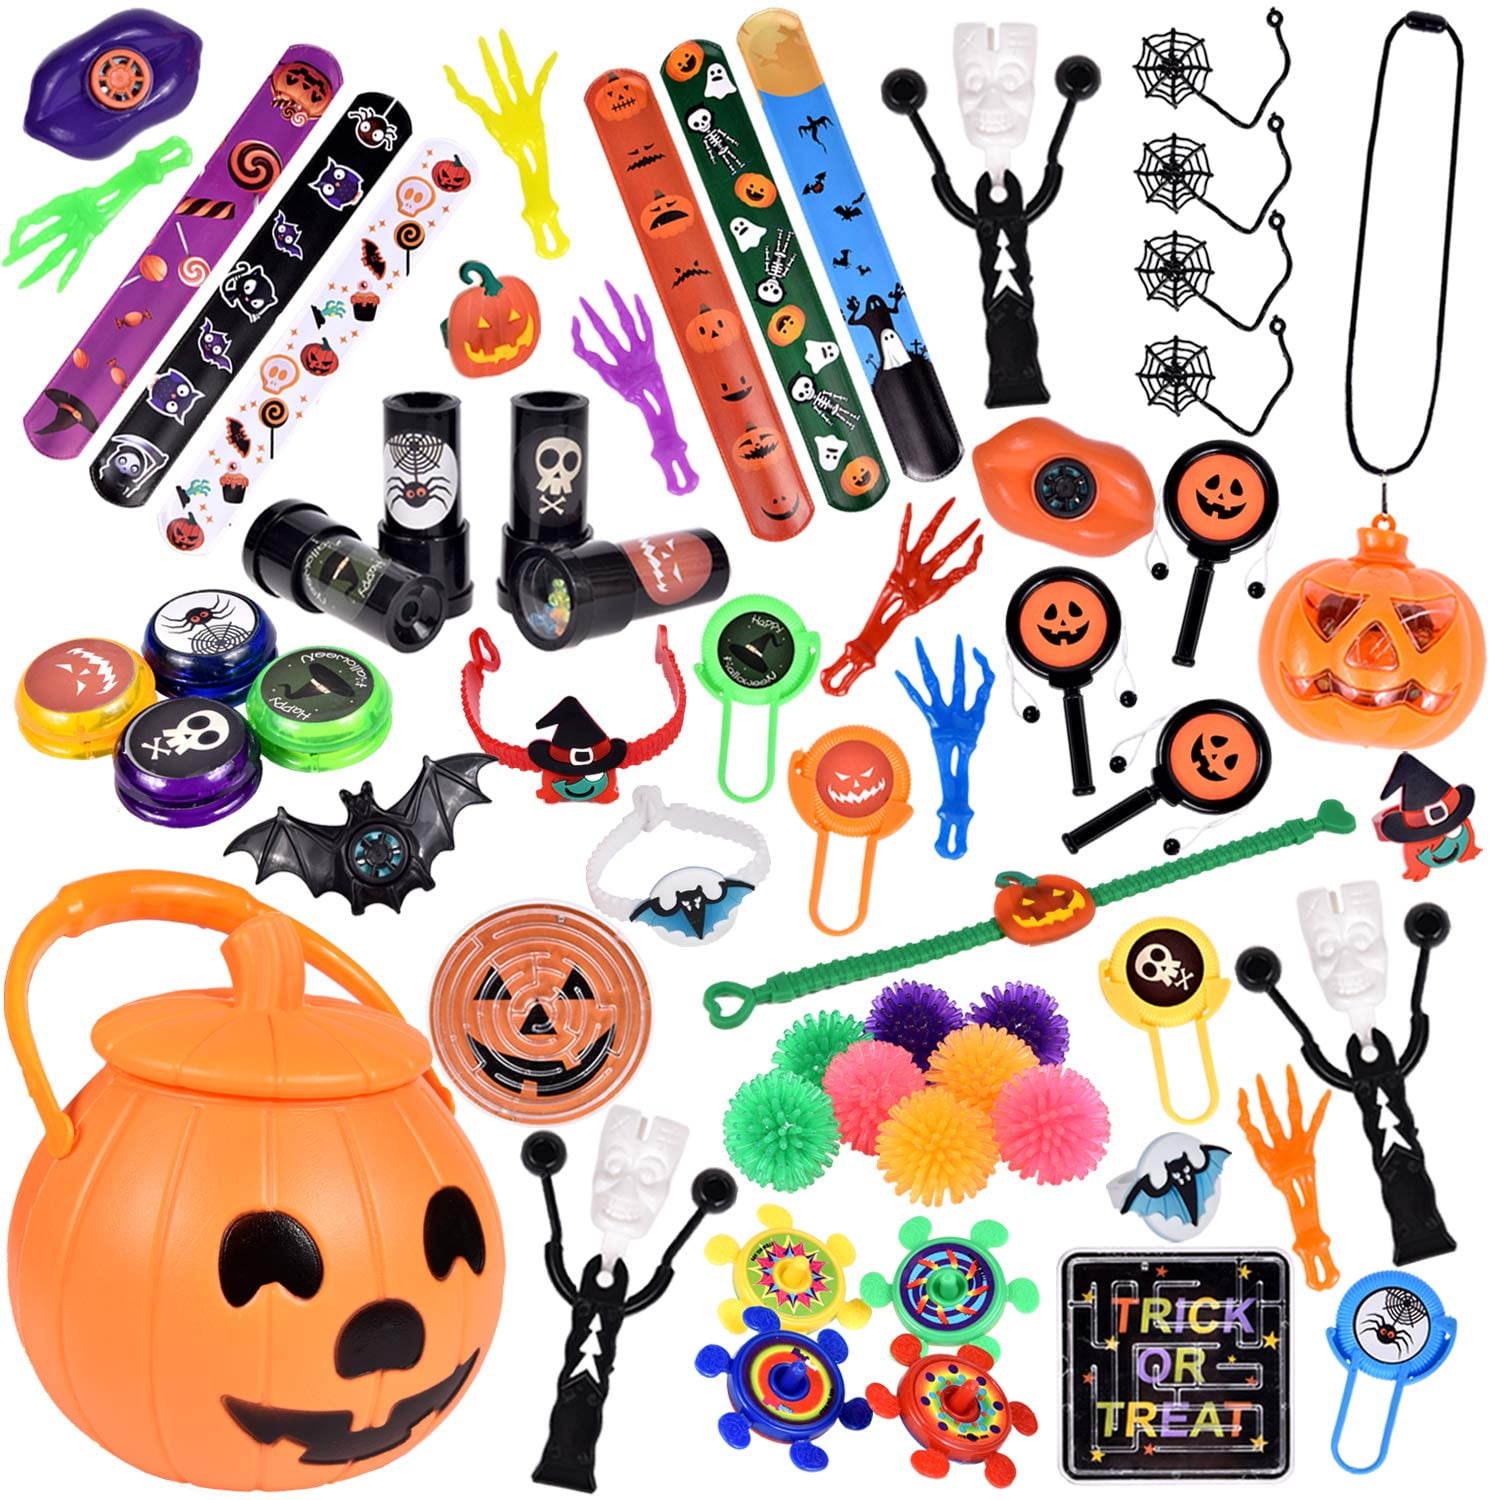  60PCS Halloween Coloring Books for Kids Ages 2,4,8,12 -  Hallowmas Trick or Treat Goodie Bags Fillers Stuffer Gifts Party Favors  Supplies : Toys & Games